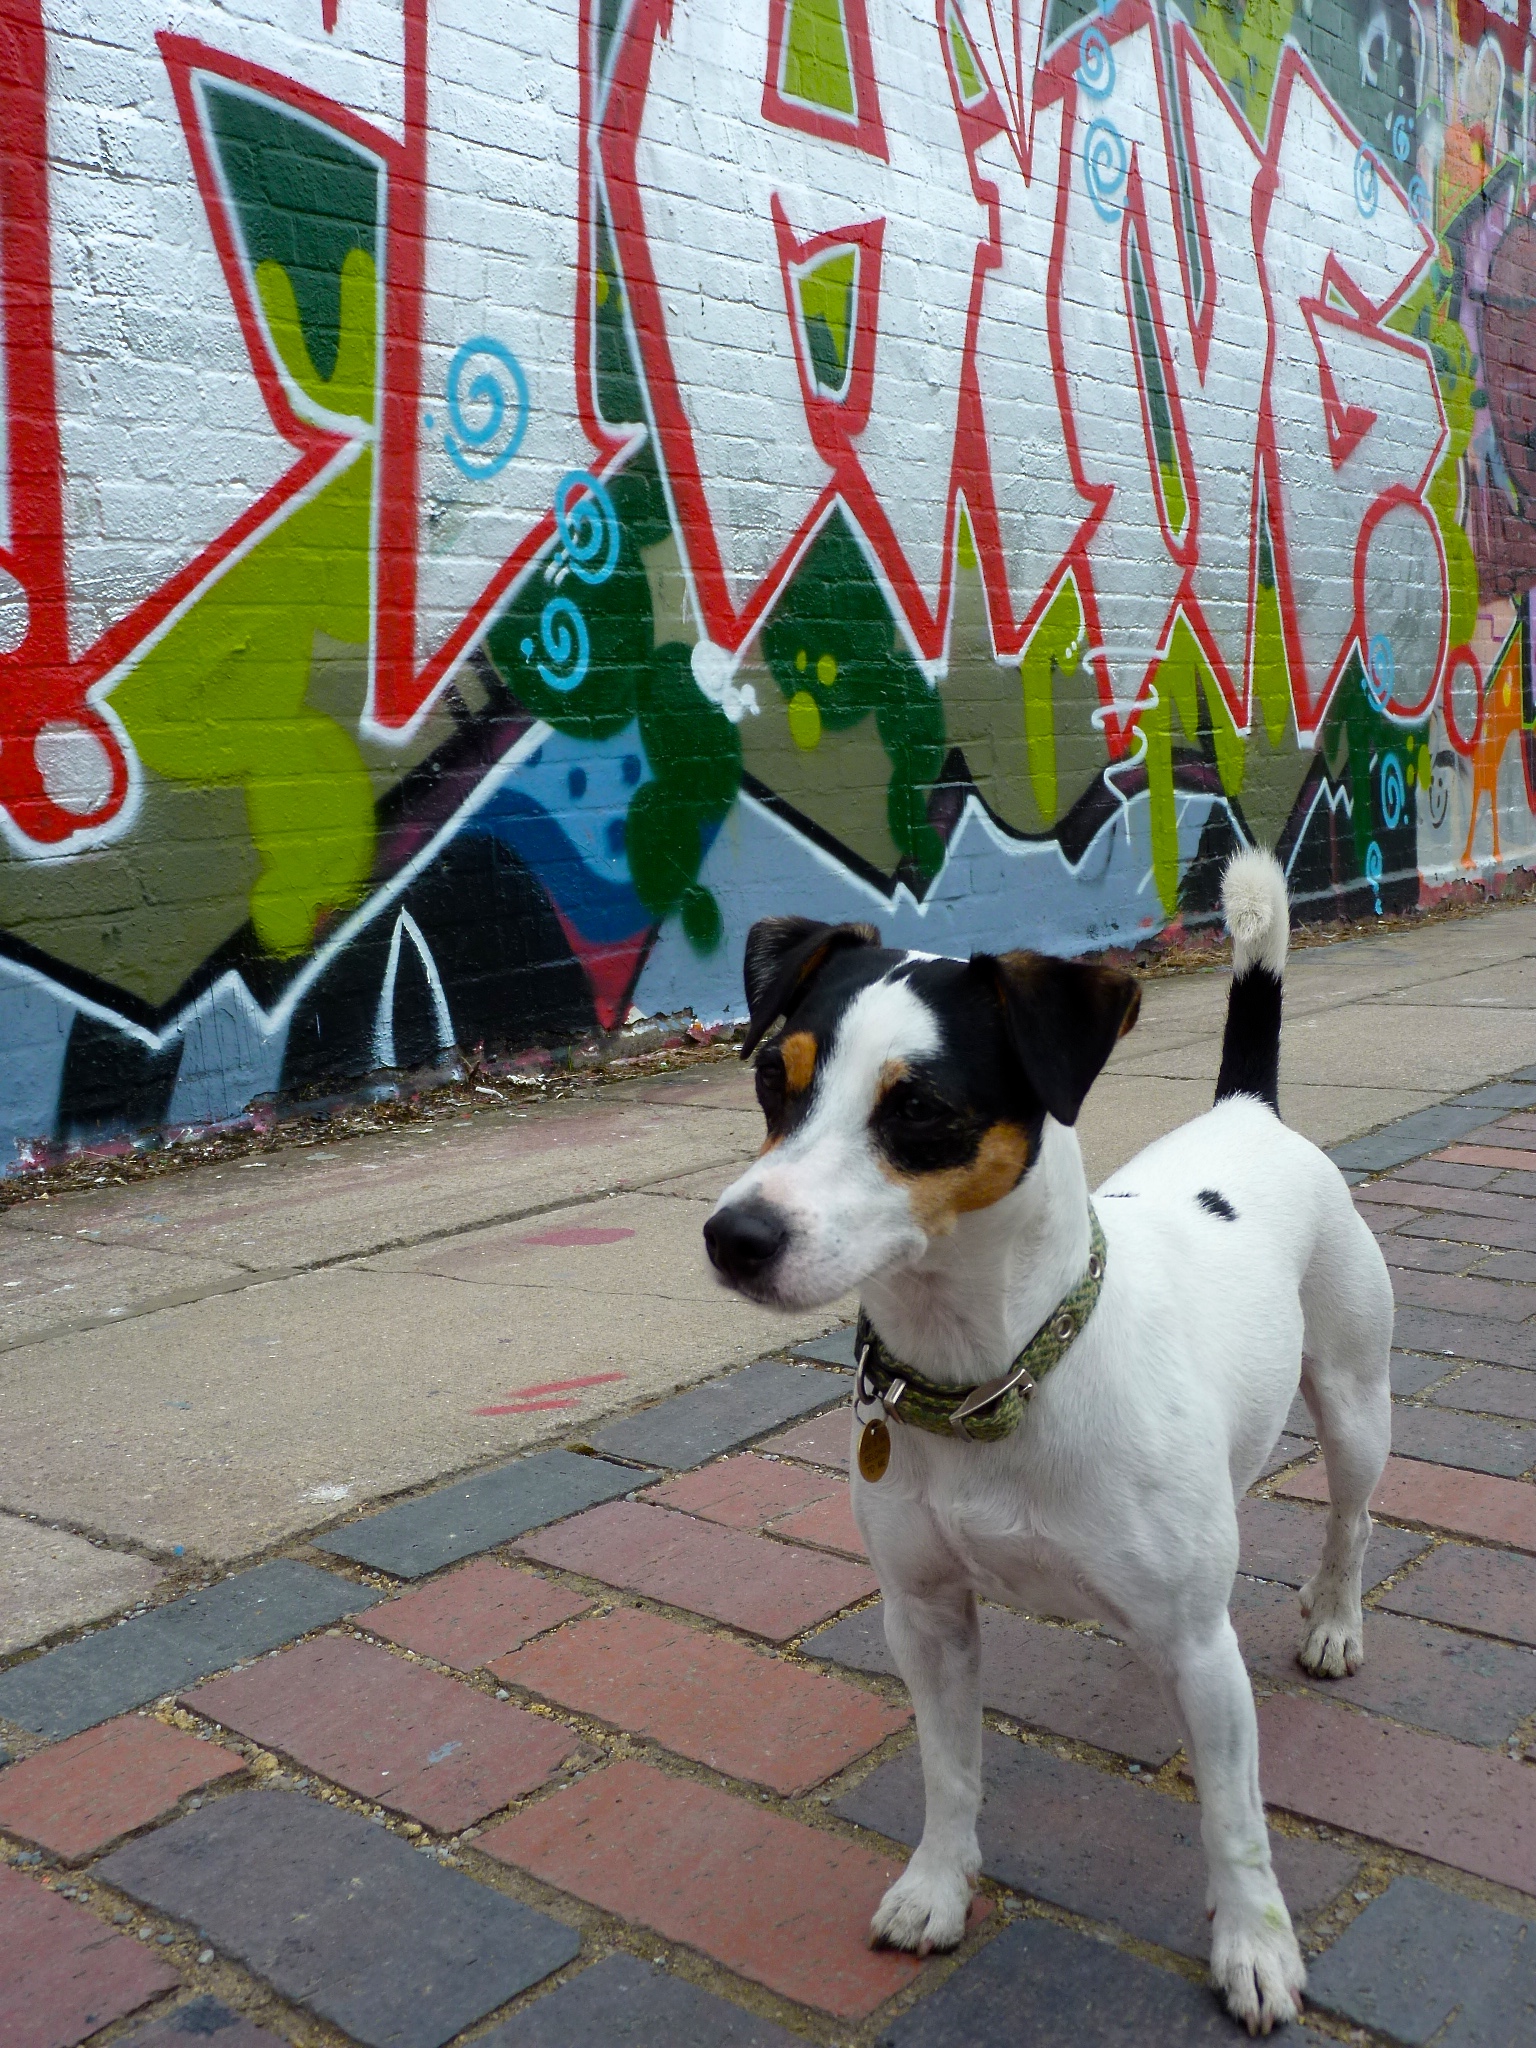  Olive Daddy likes to take pictures of graffiti art. While he takes pictures I like to smell things. My sense of smell is much better than humans. When I walk down the street and sniff, I can tell which other dogs have been there-- and what they've b